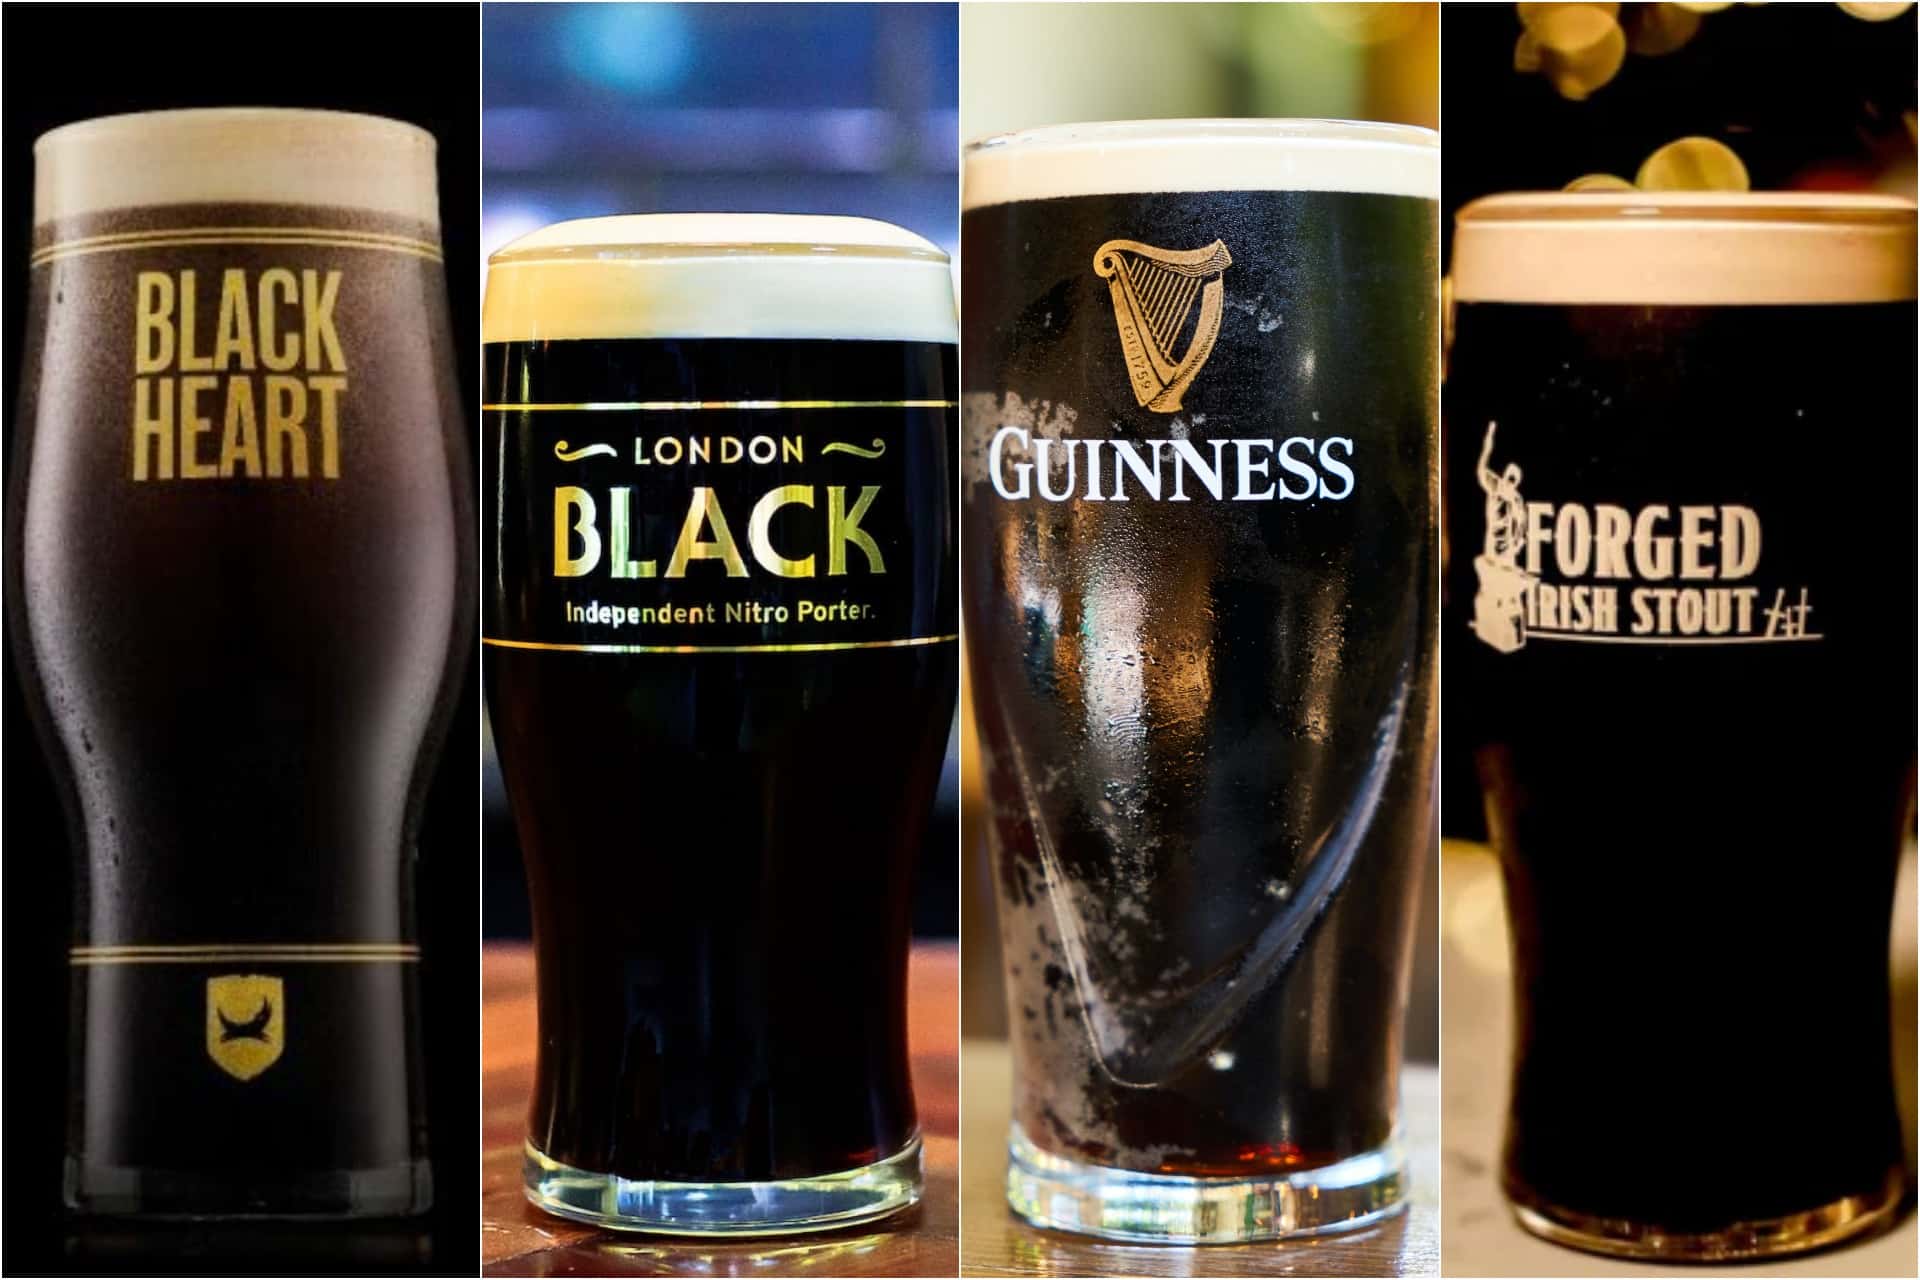 Stout Wars: The only Guinness rival better than the original, according to drinkers